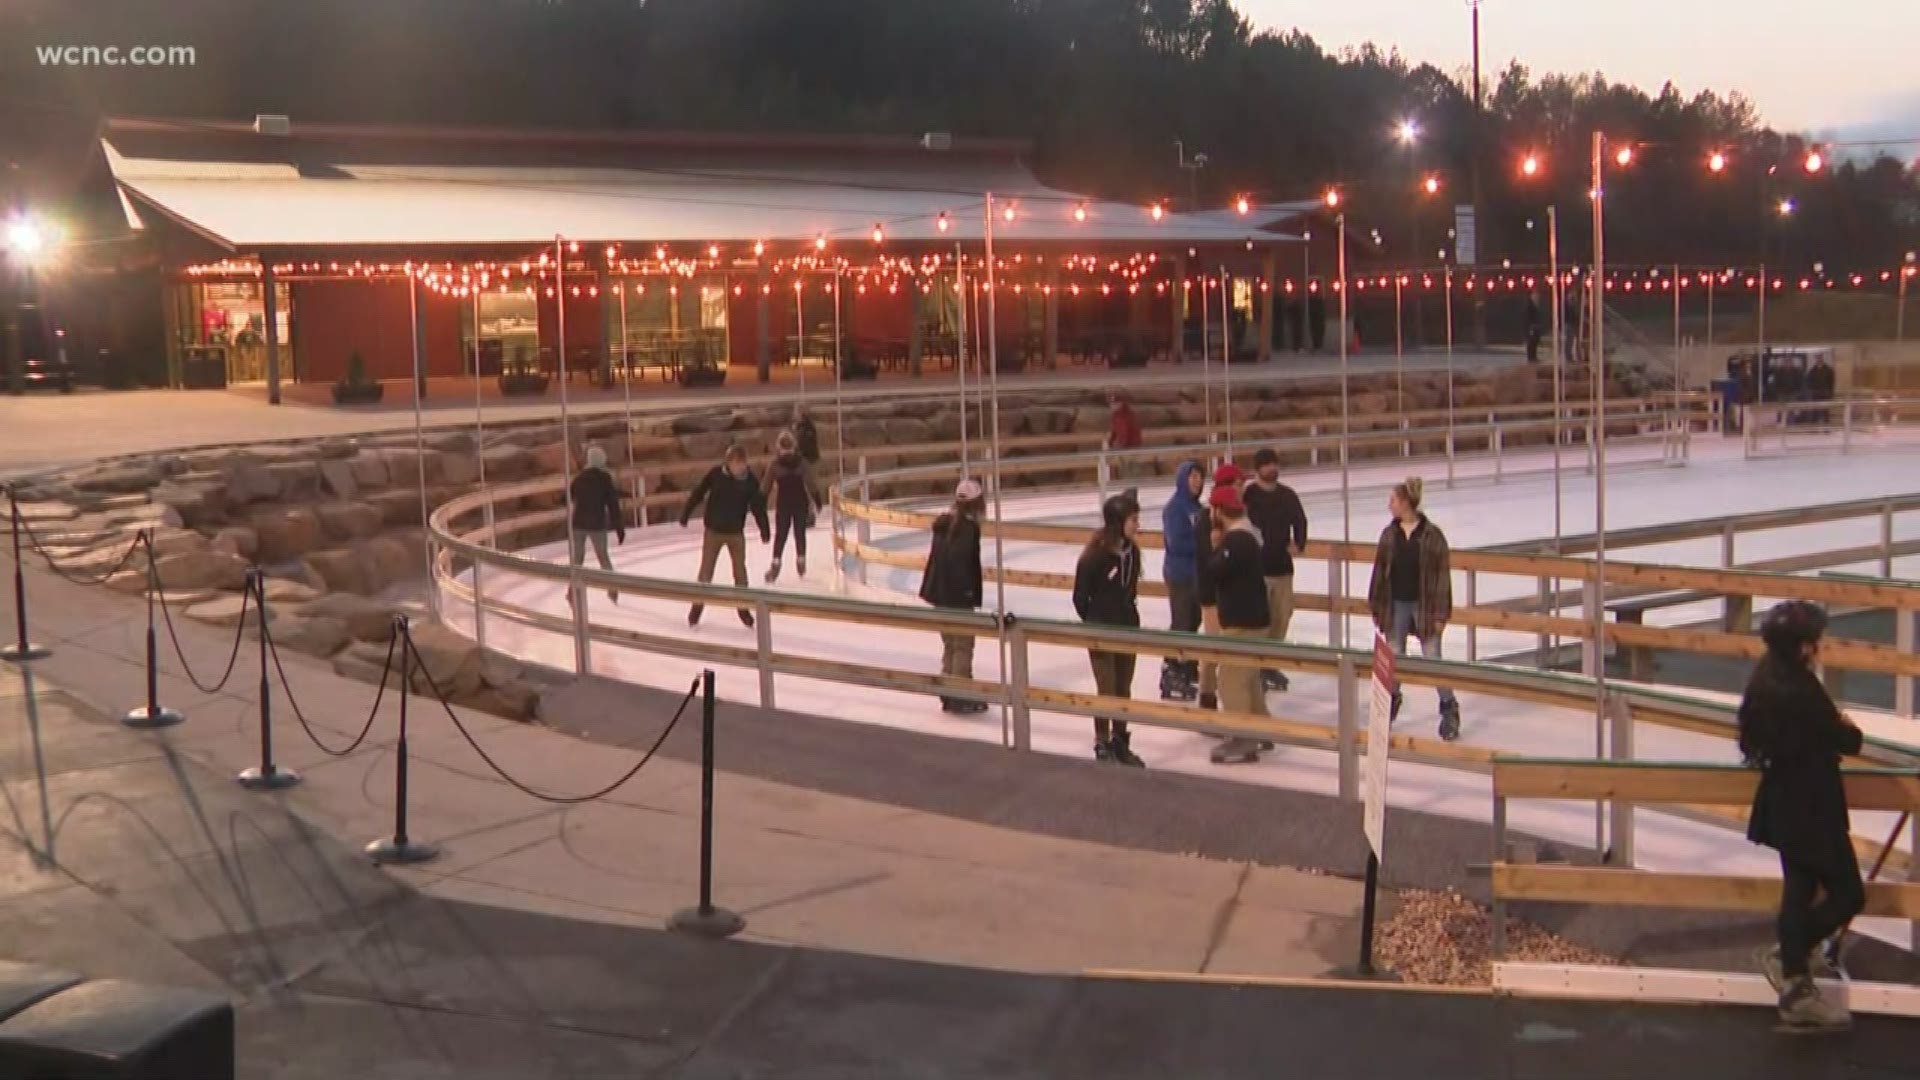 The renderings that had everyone talking in recent weeks have taken shape at the Whitewater Center. Tuesday, visitors can lace up their skates and hit the ice.